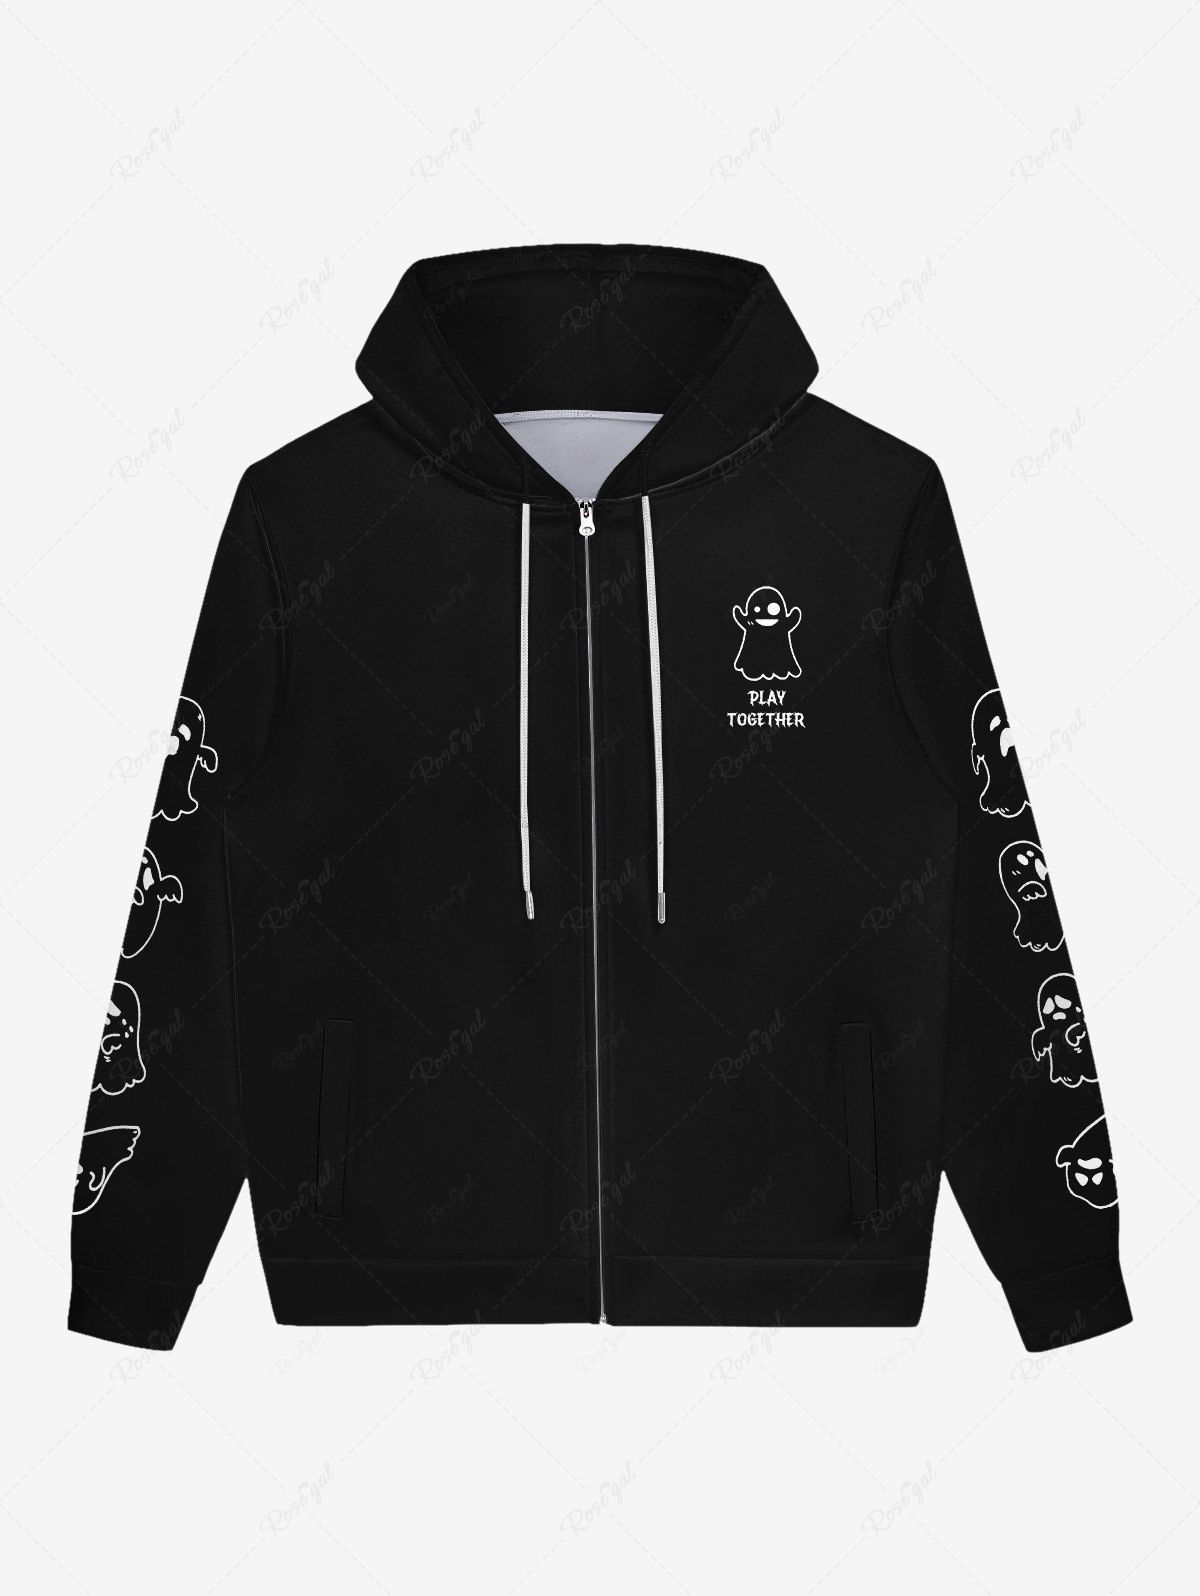 Fancy Gothic Ghost Letters Print Zipper Pockets Drawstring Hoodie For Men  